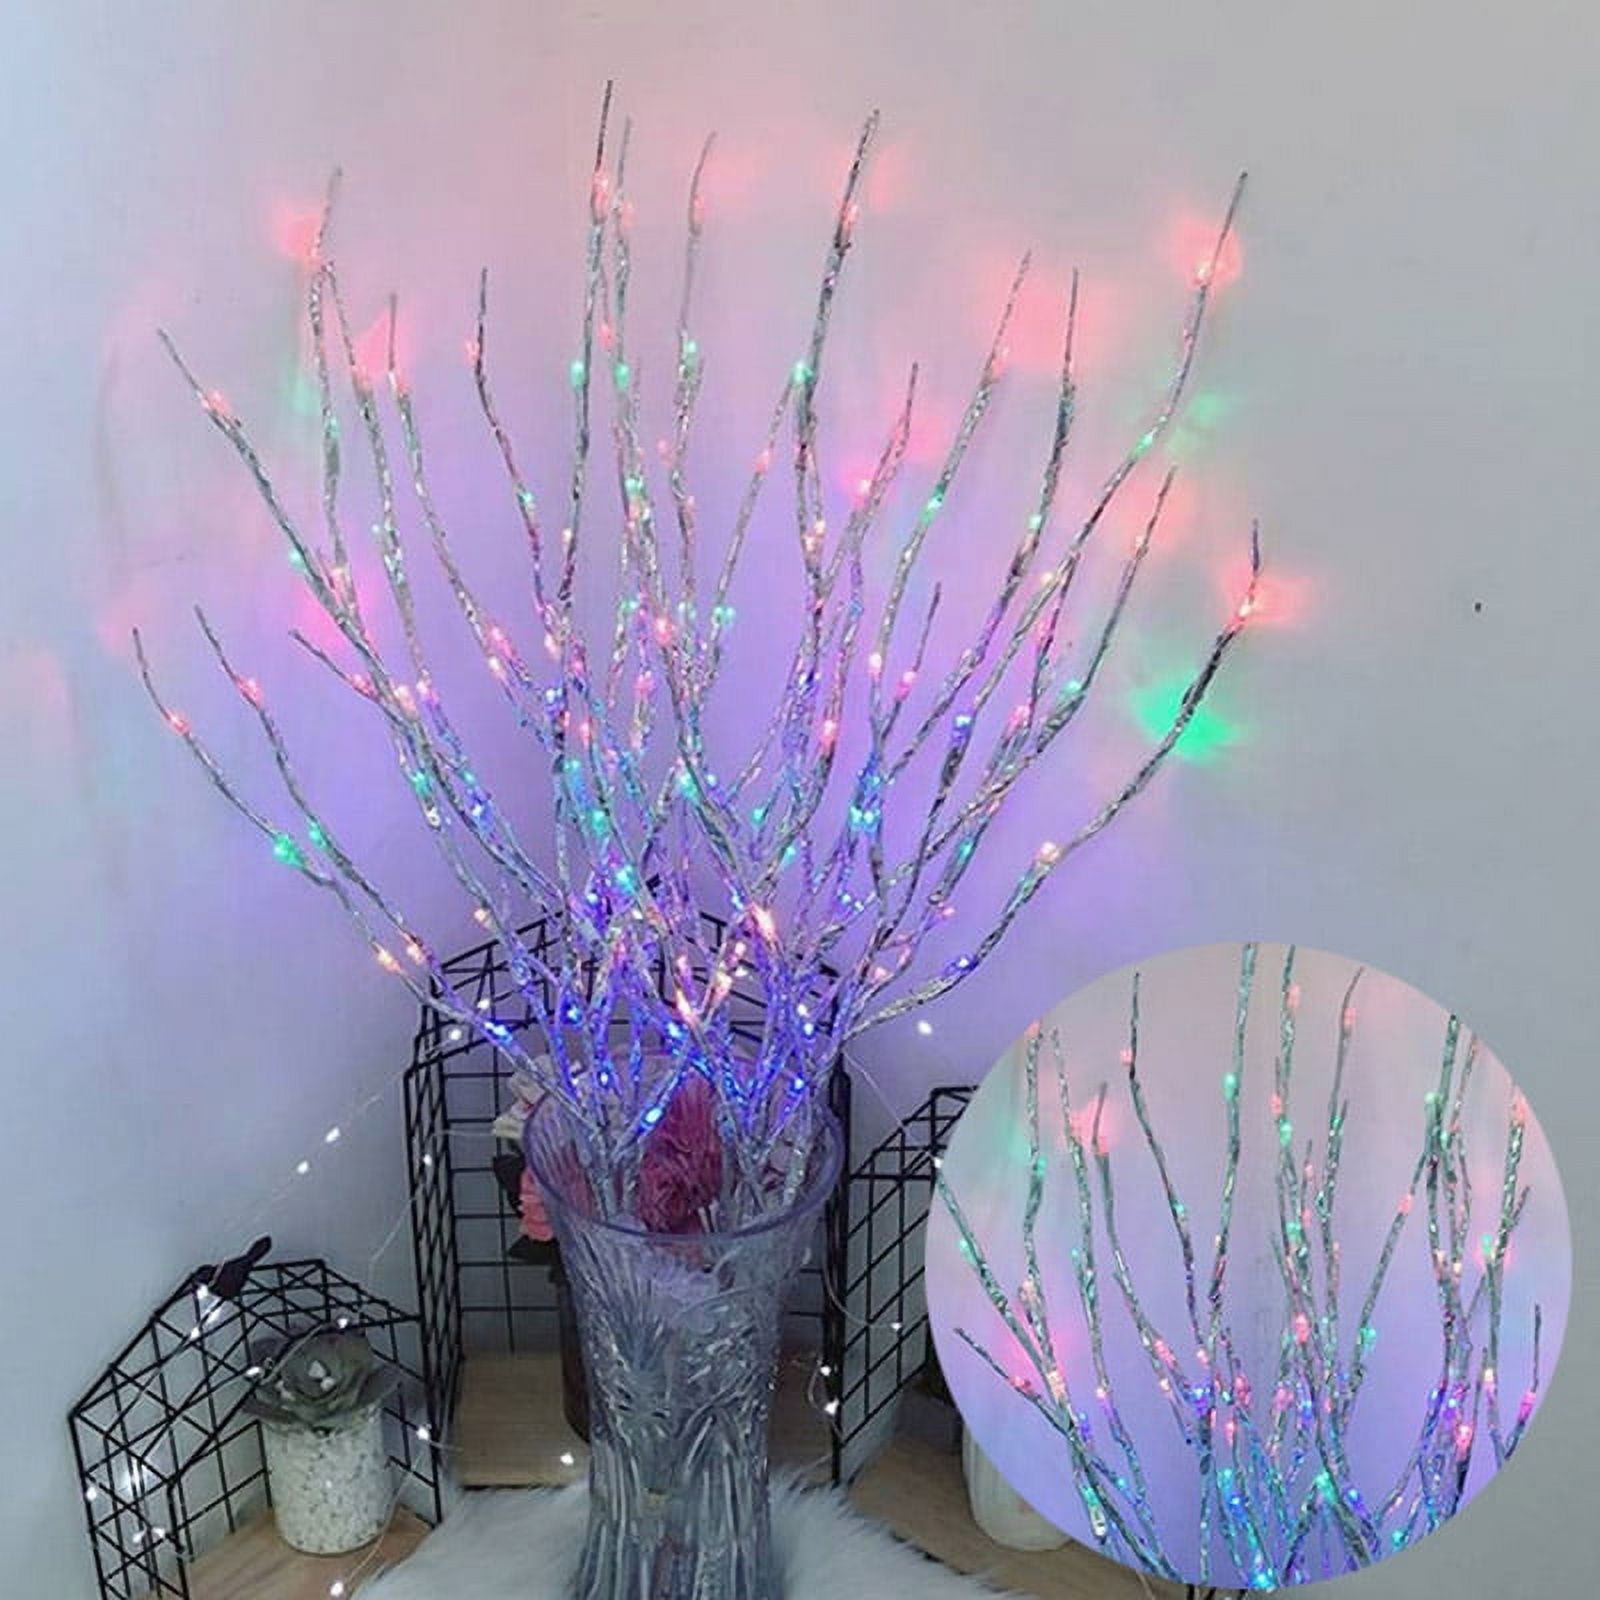 3 Pack Twig Lights, Prelit Branches, USB Plug in Branches Lights with 60 LED Bulbs, Romantic Decorative Iights for Vase, Lighted Tree Branches for in